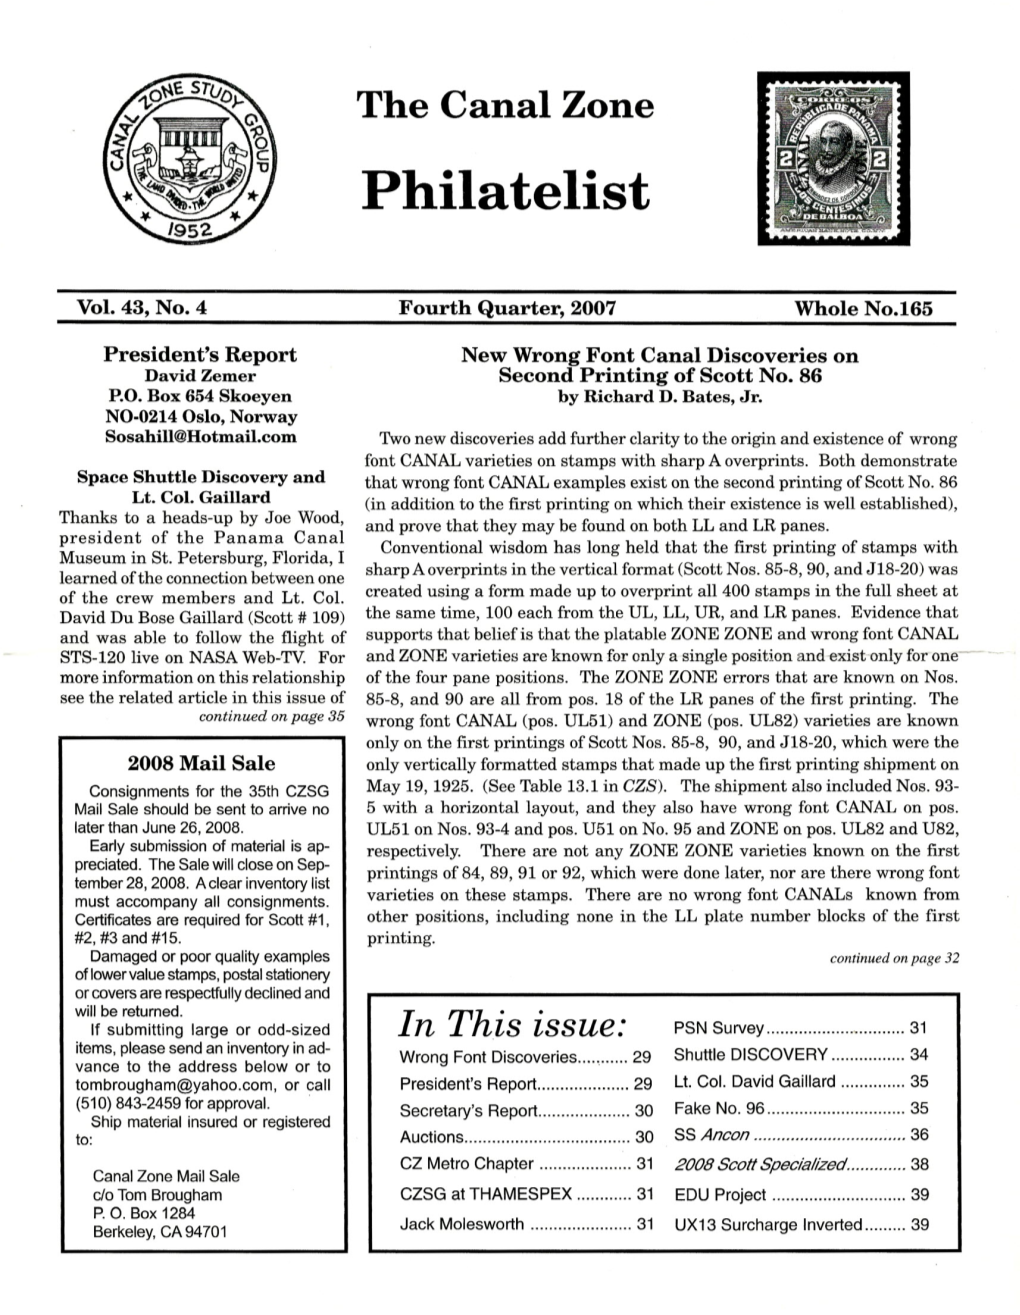 Issue of 85-8, and 90 Are All from Pos